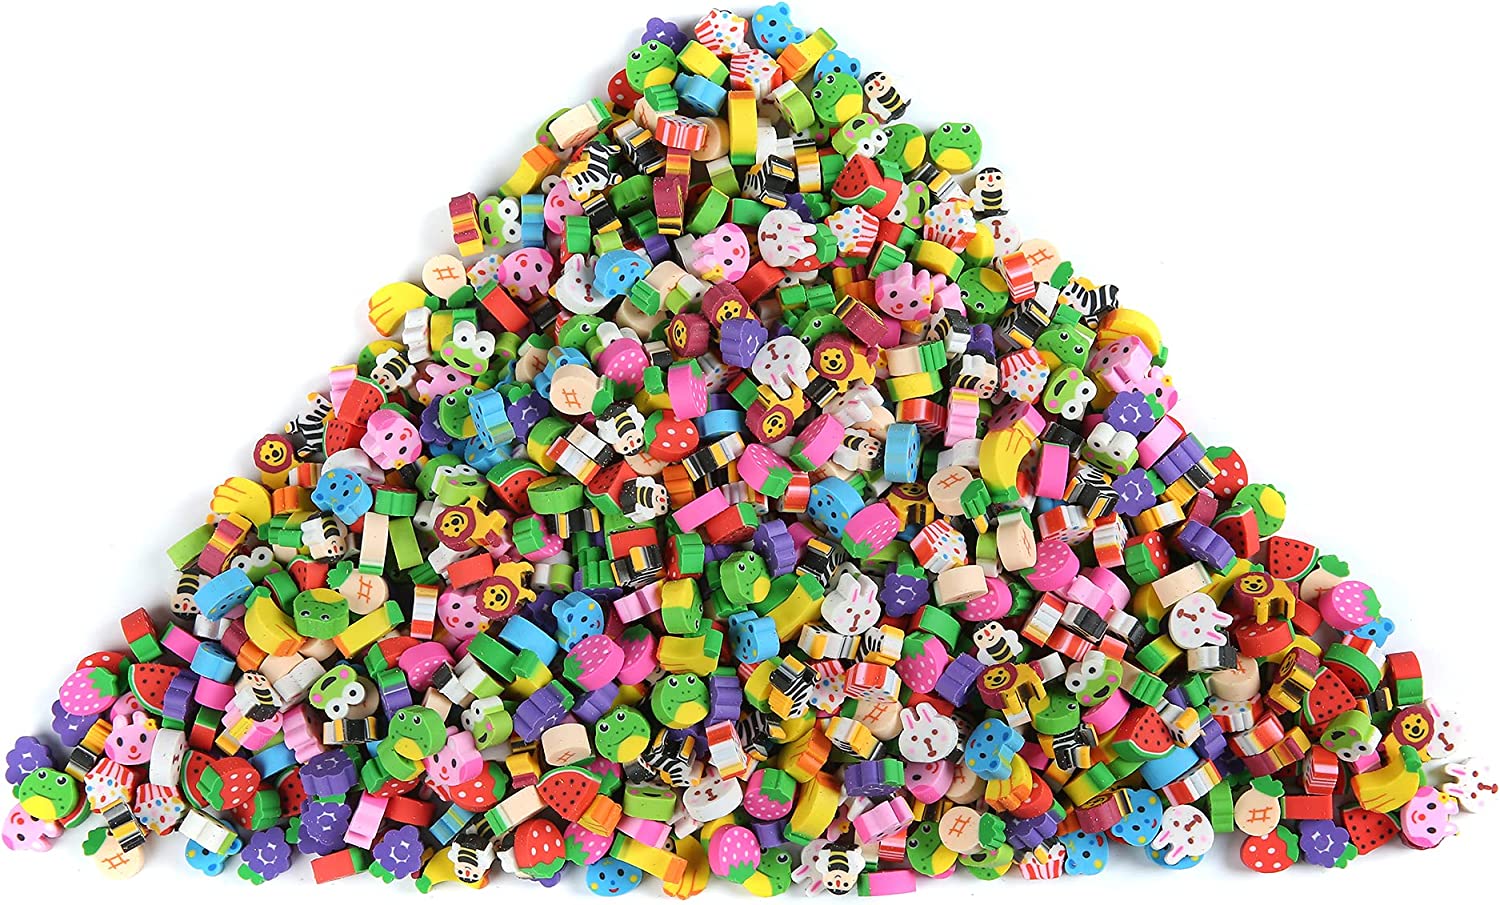 100 Pack Pencil Erasers Animal Erasers for Kids Puzzle Erasers 3D Mini